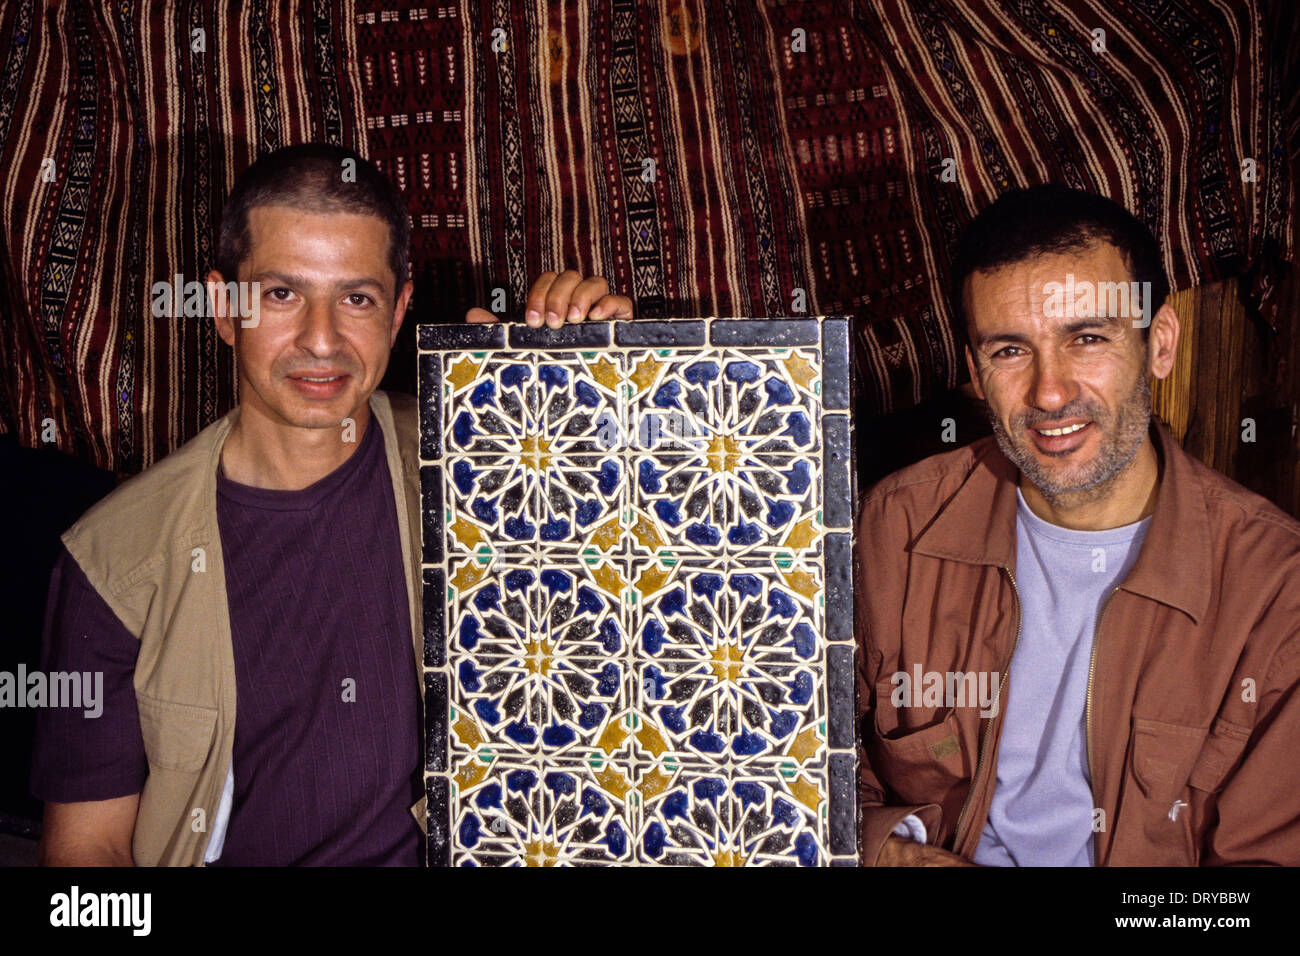 Ceramics, Nabeul, Tunisia. Patrick Cali (left) and Mohamed Messaoudi (right) showing their new resin tiles, faux-antiques. Stock Photo